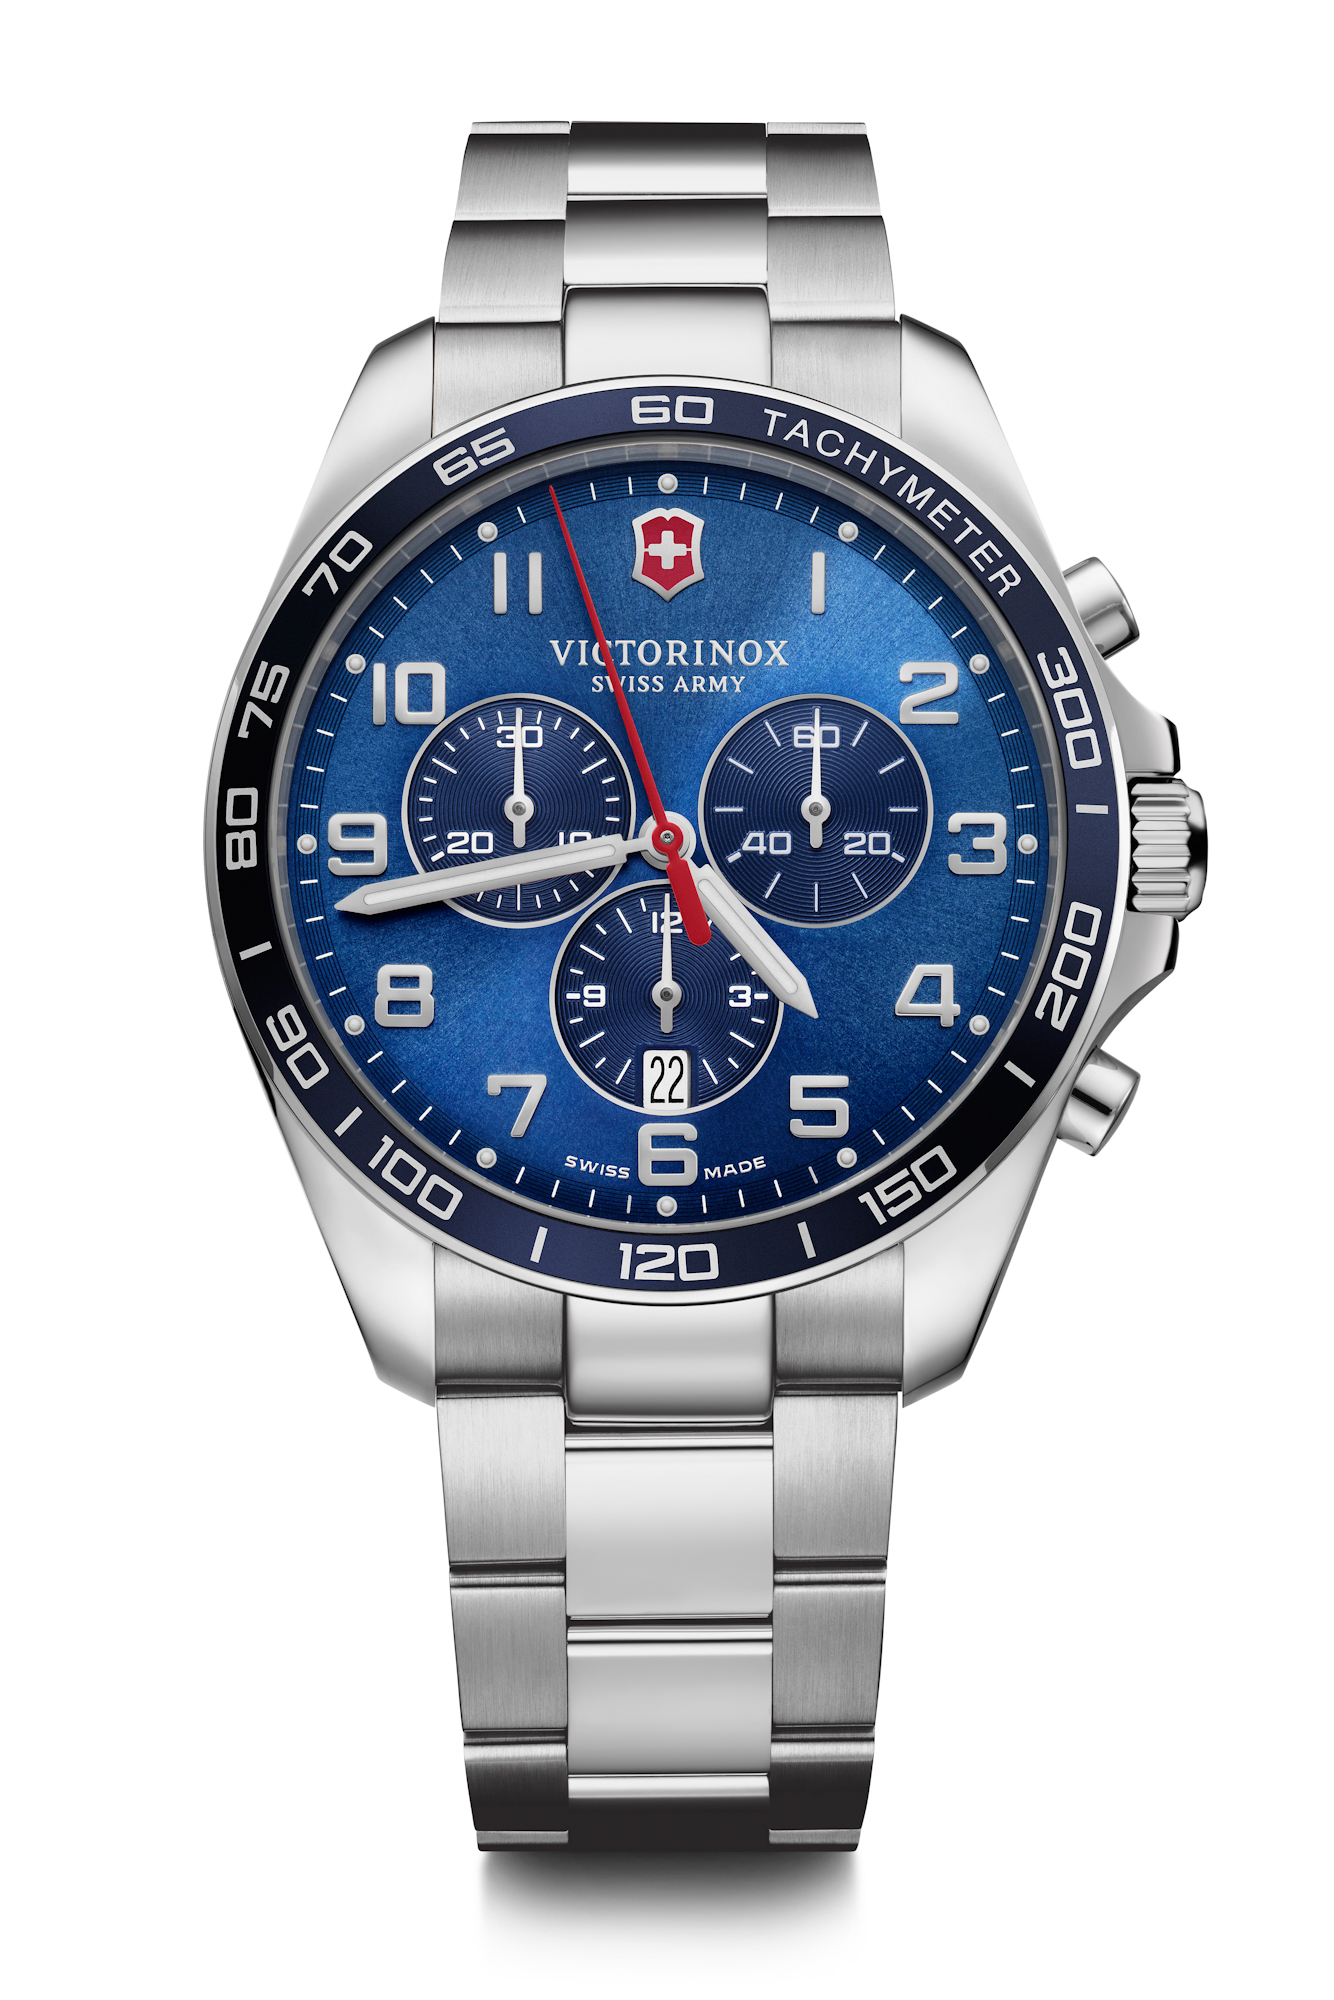 Victorinox Swiss Army FieldForce Classic Chronograph timeandwatches.pl